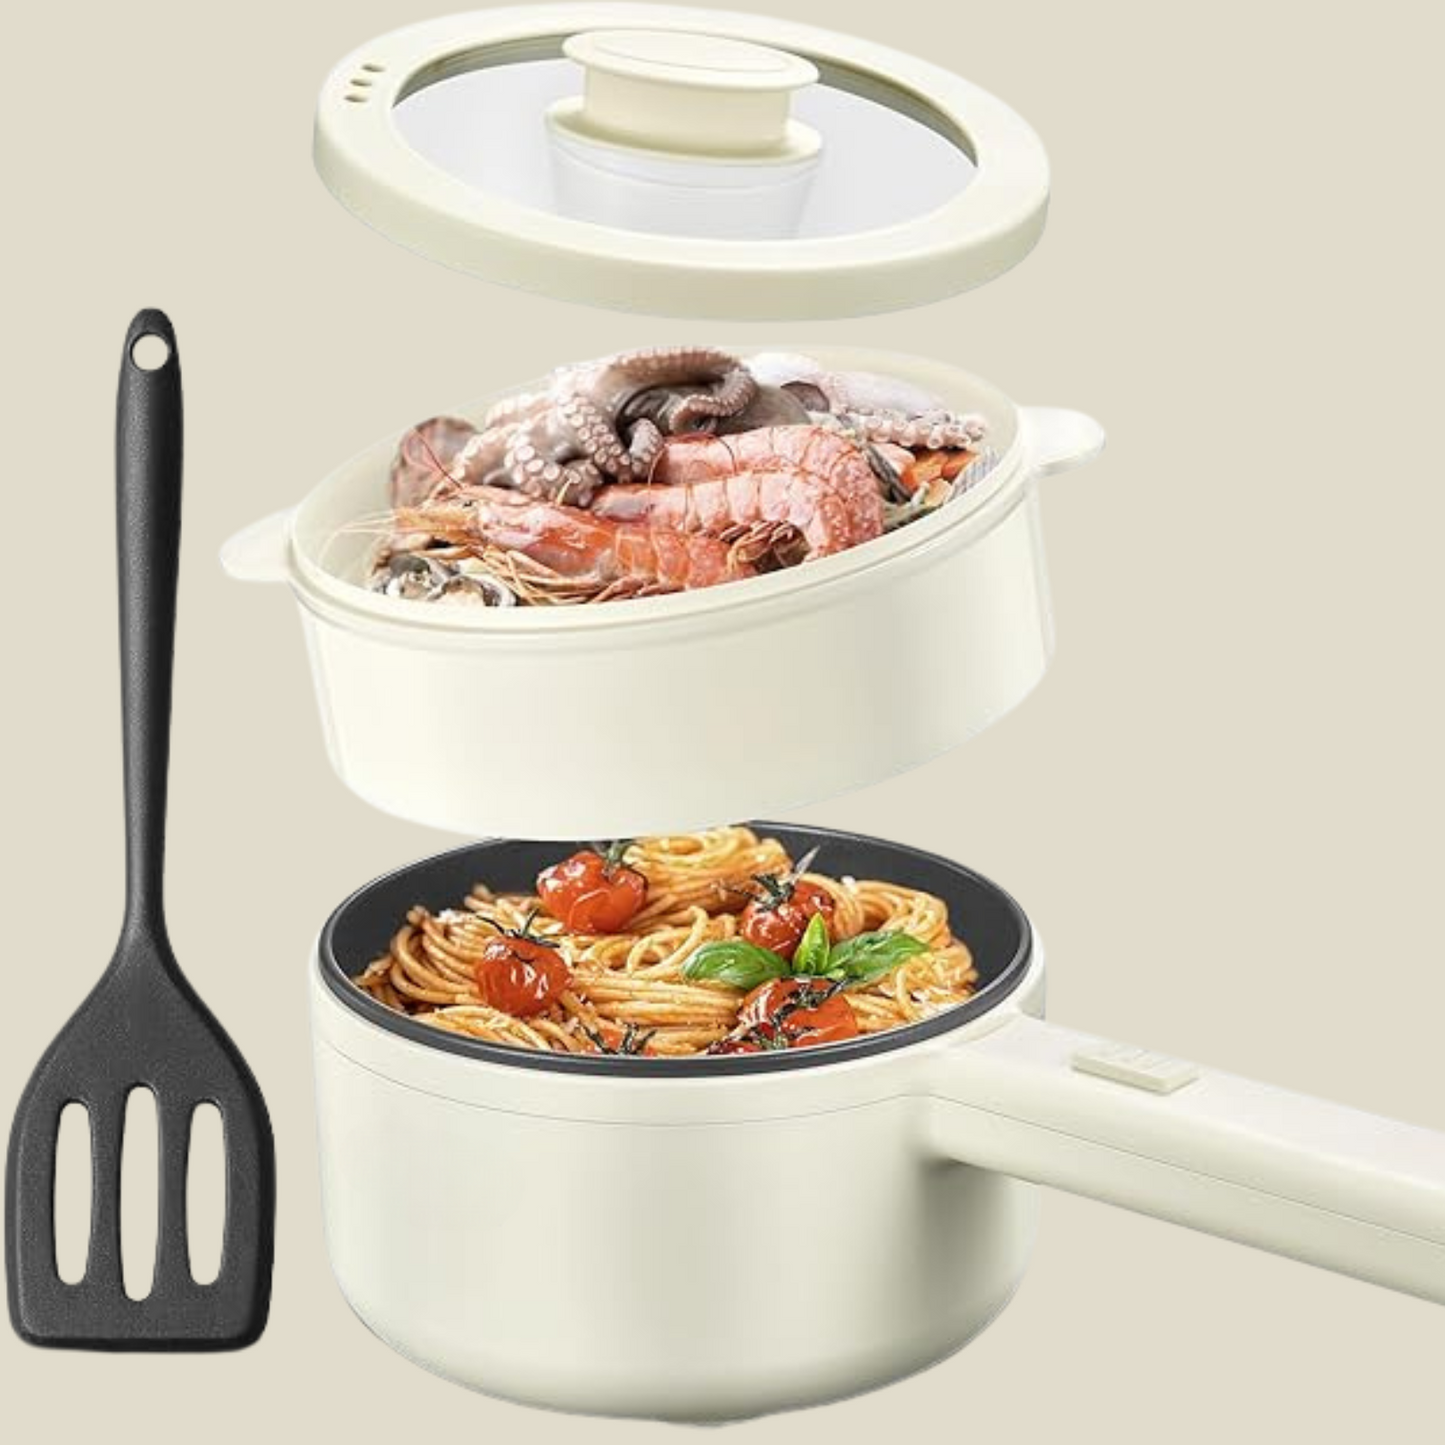 Hot Pot Electric With Steamer, 1.6L Ramen Cooker Non-Stick Sauté Pan for Steak, Egg, Fried Rice, Ramen, Oatmeal, Soup, Portable Personal Hot Pot Perfect Suit for Dorm Room and Apartment